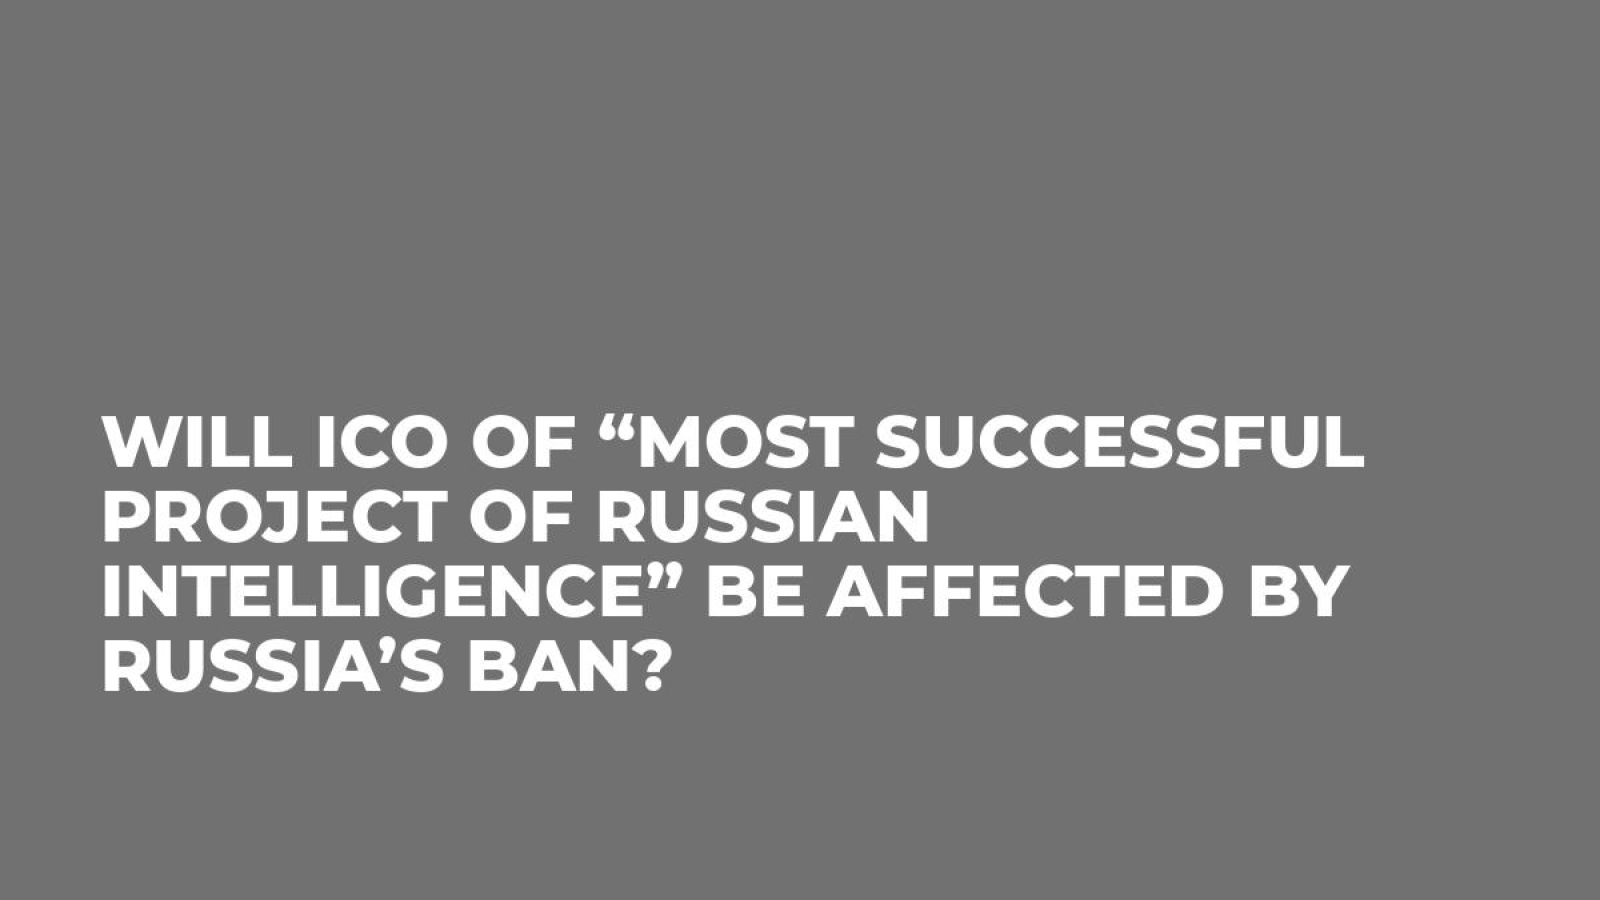 Will ICO of “Most Successful Project of Russian Intelligence” be Affected by Russia’s Ban?